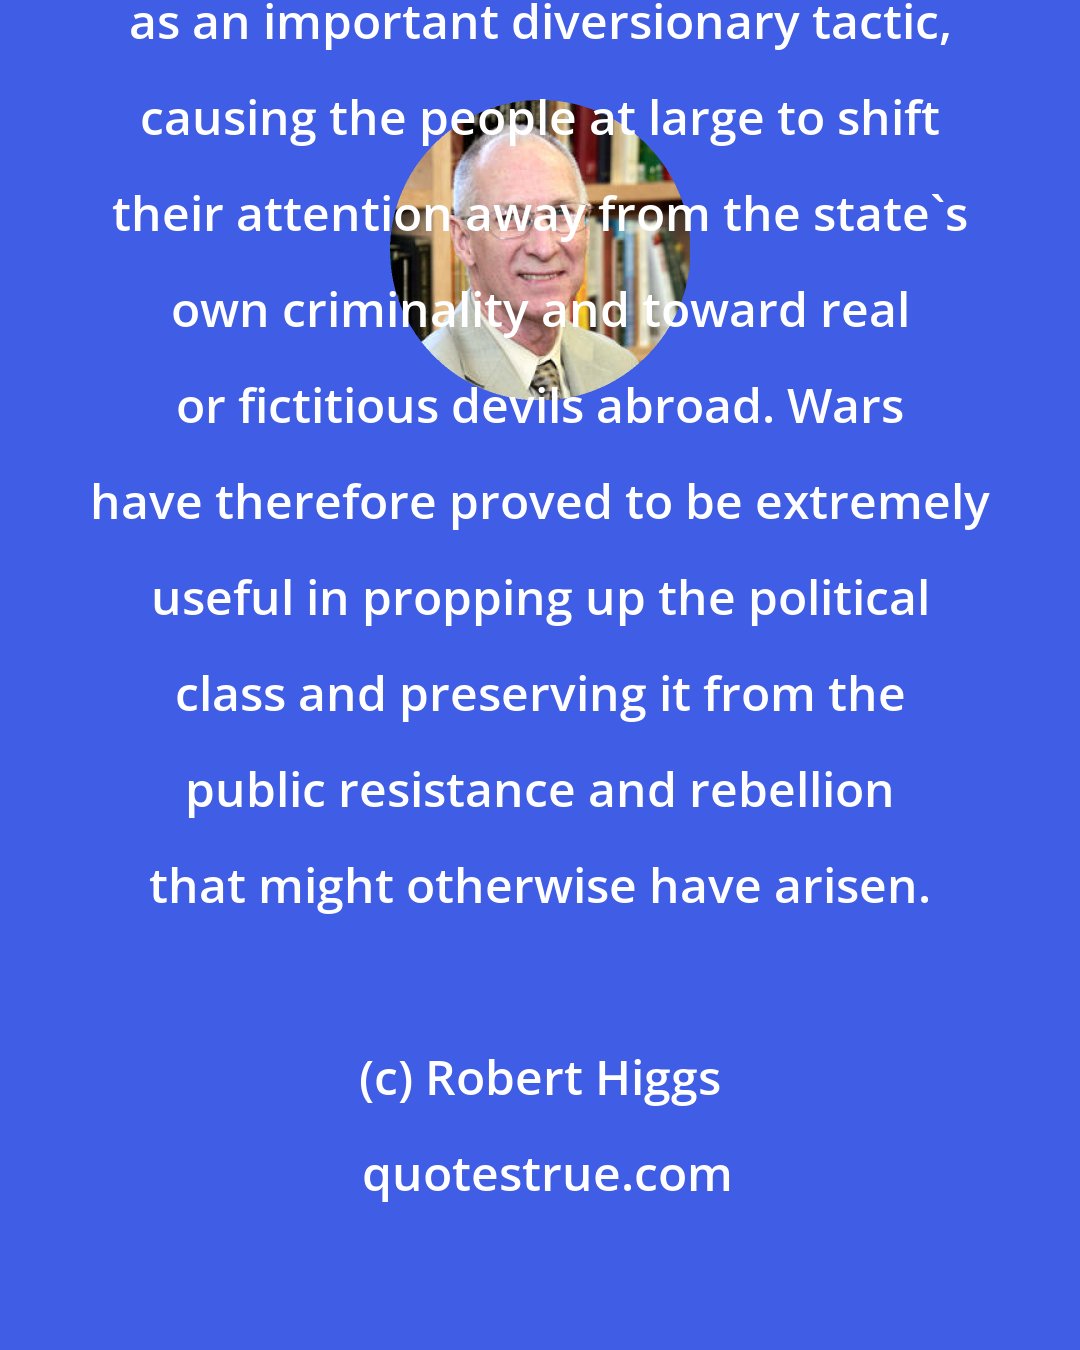 Robert Higgs: In U.S. history, war has served as an important diversionary tactic, causing the people at large to shift their attention away from the state's own criminality and toward real or fictitious devils abroad. Wars have therefore proved to be extremely useful in propping up the political class and preserving it from the public resistance and rebellion that might otherwise have arisen.